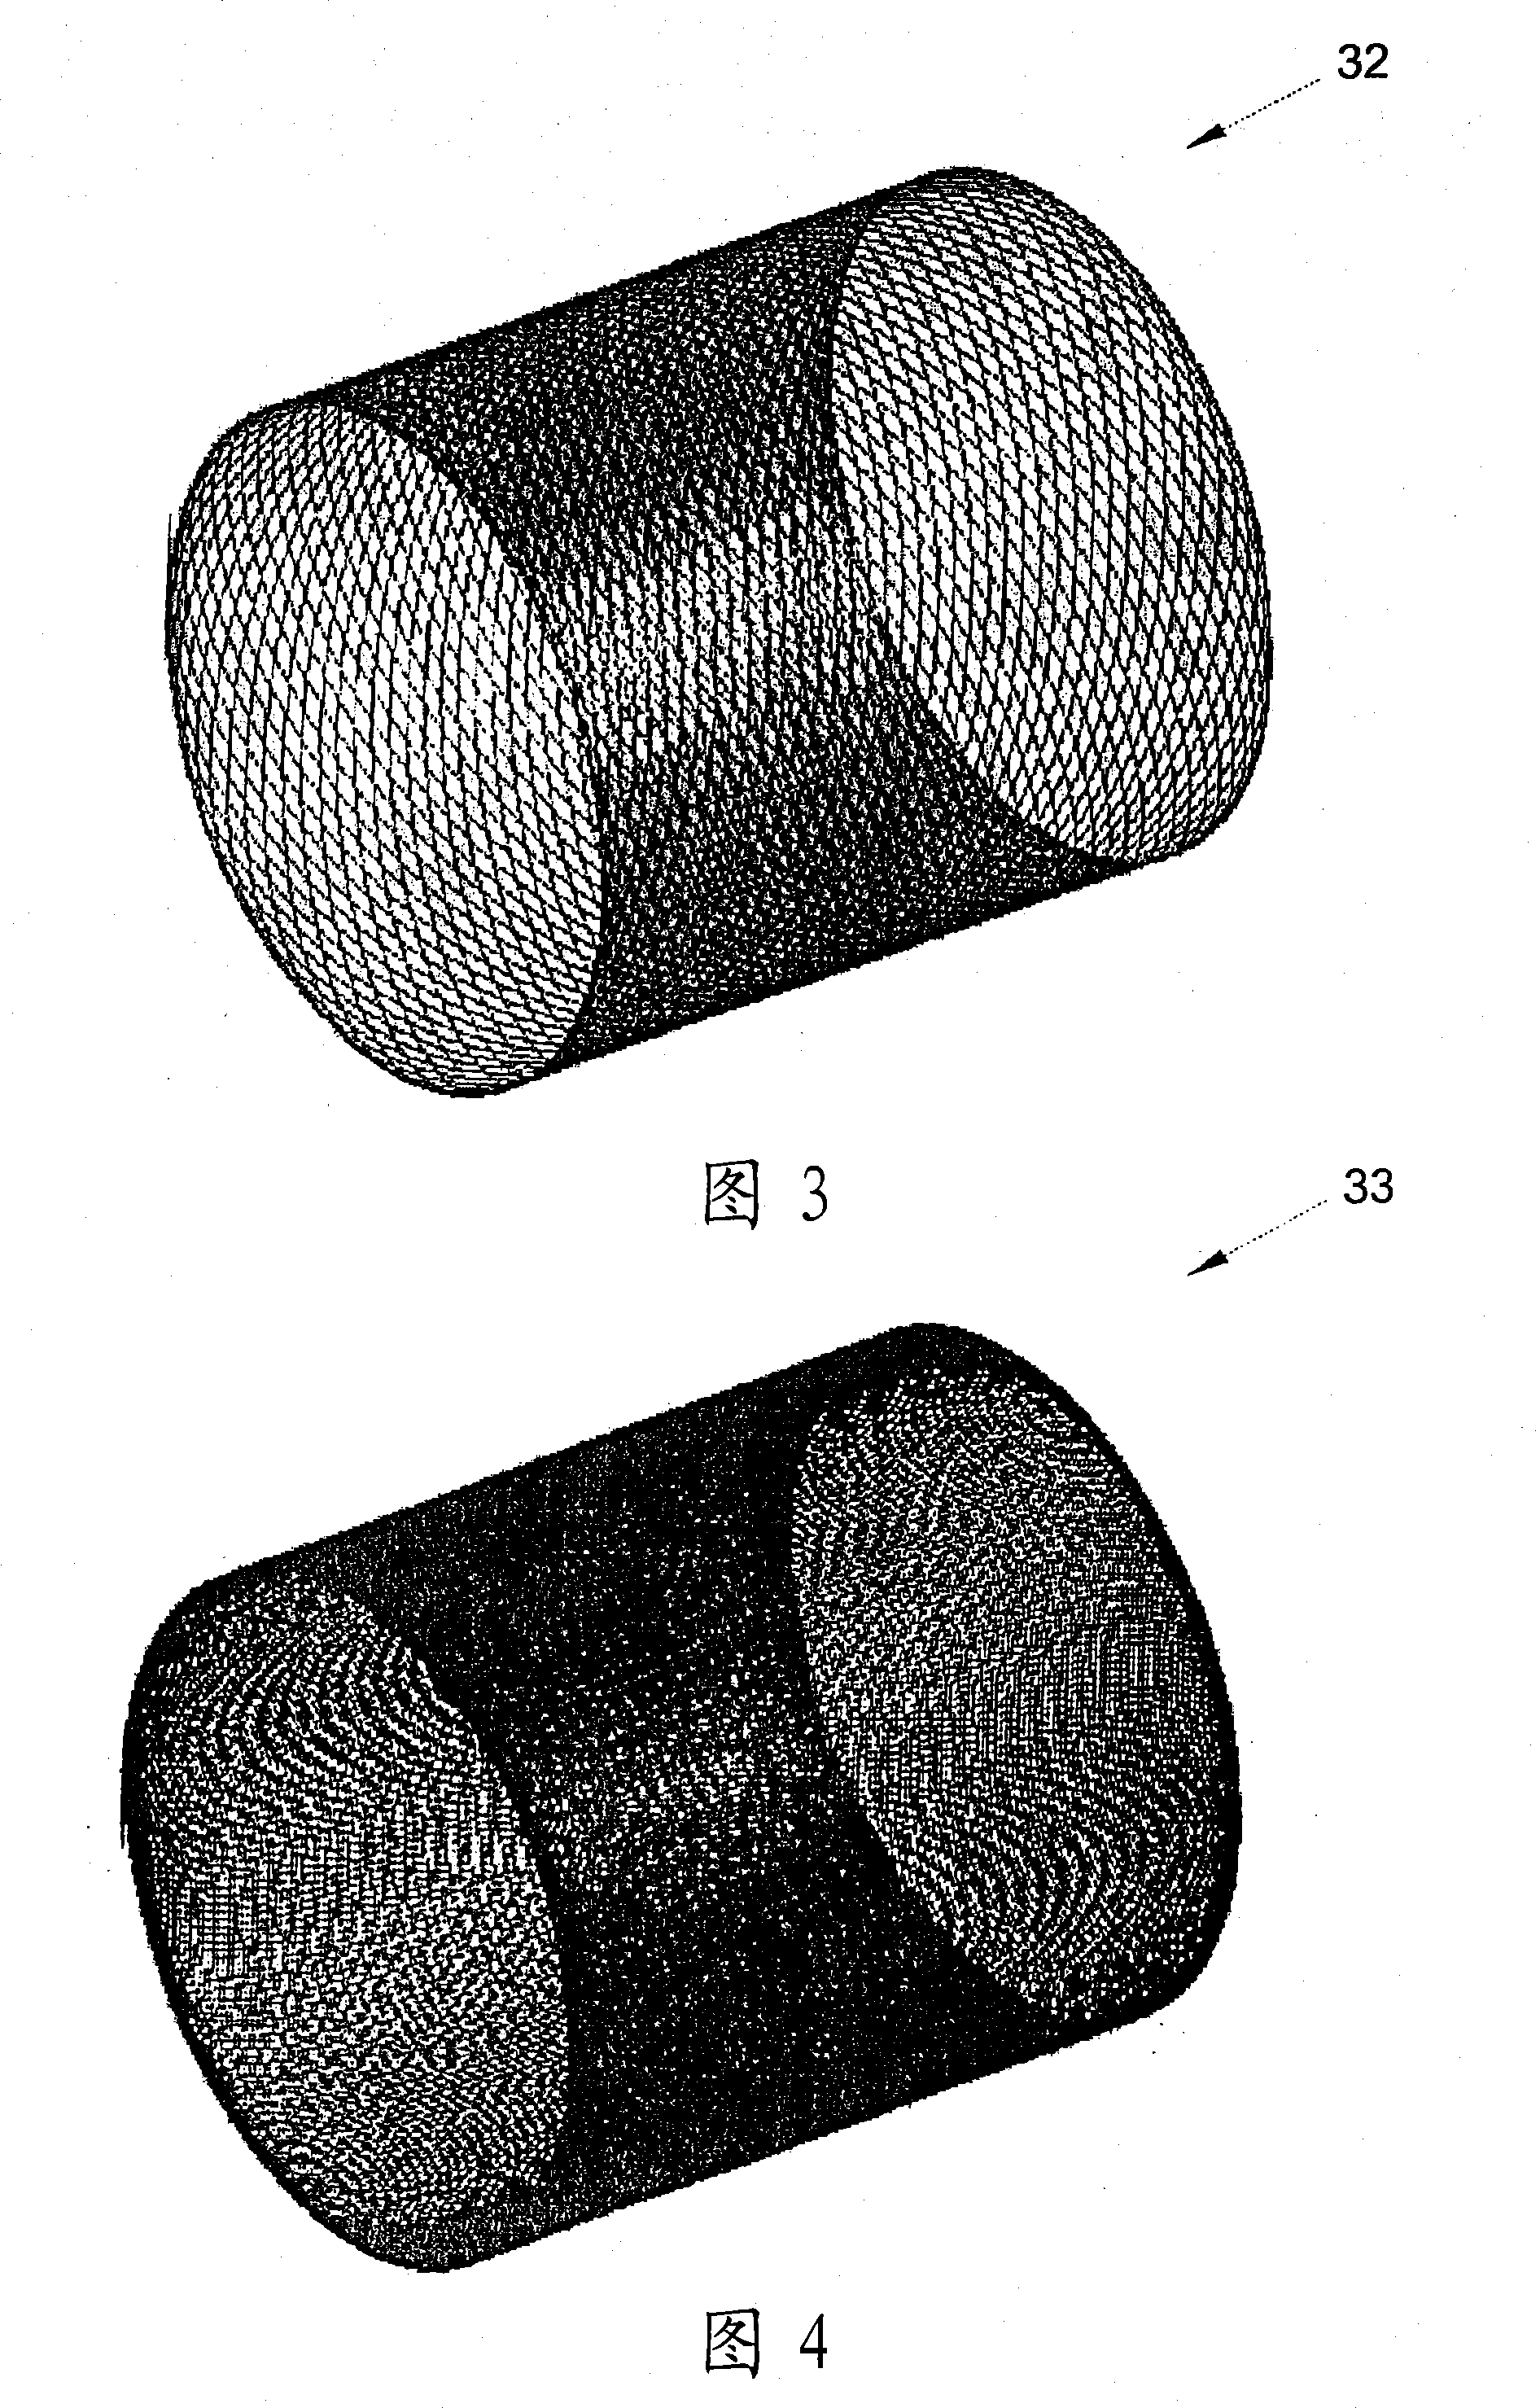 Crosswound bobbin and method for producing such a bobbin